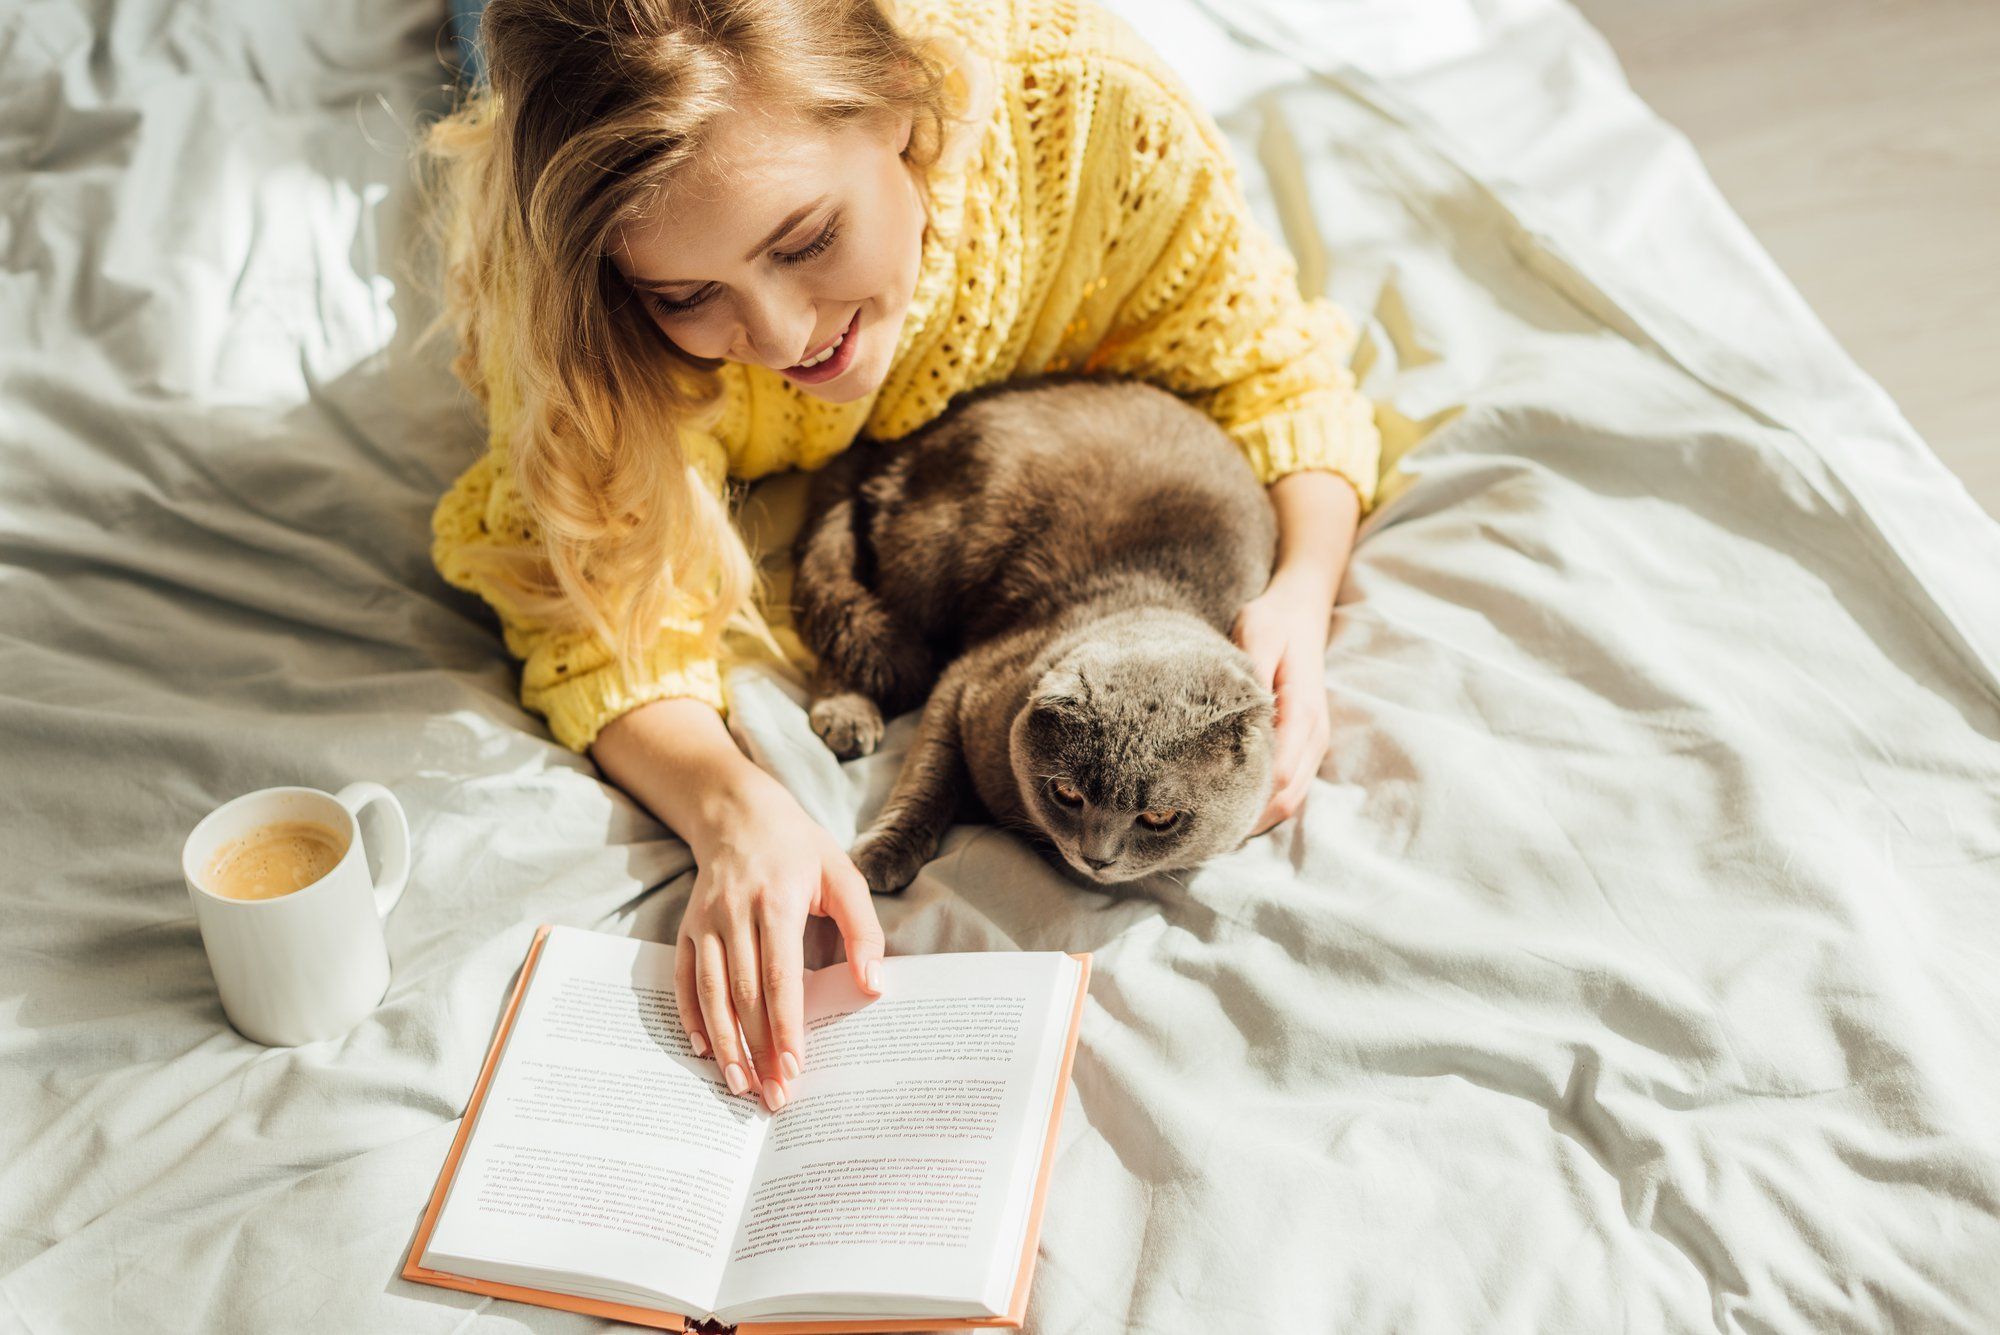 Does My Cat Love Me? Five Ways to Gauge Your Attachment With Your Cat